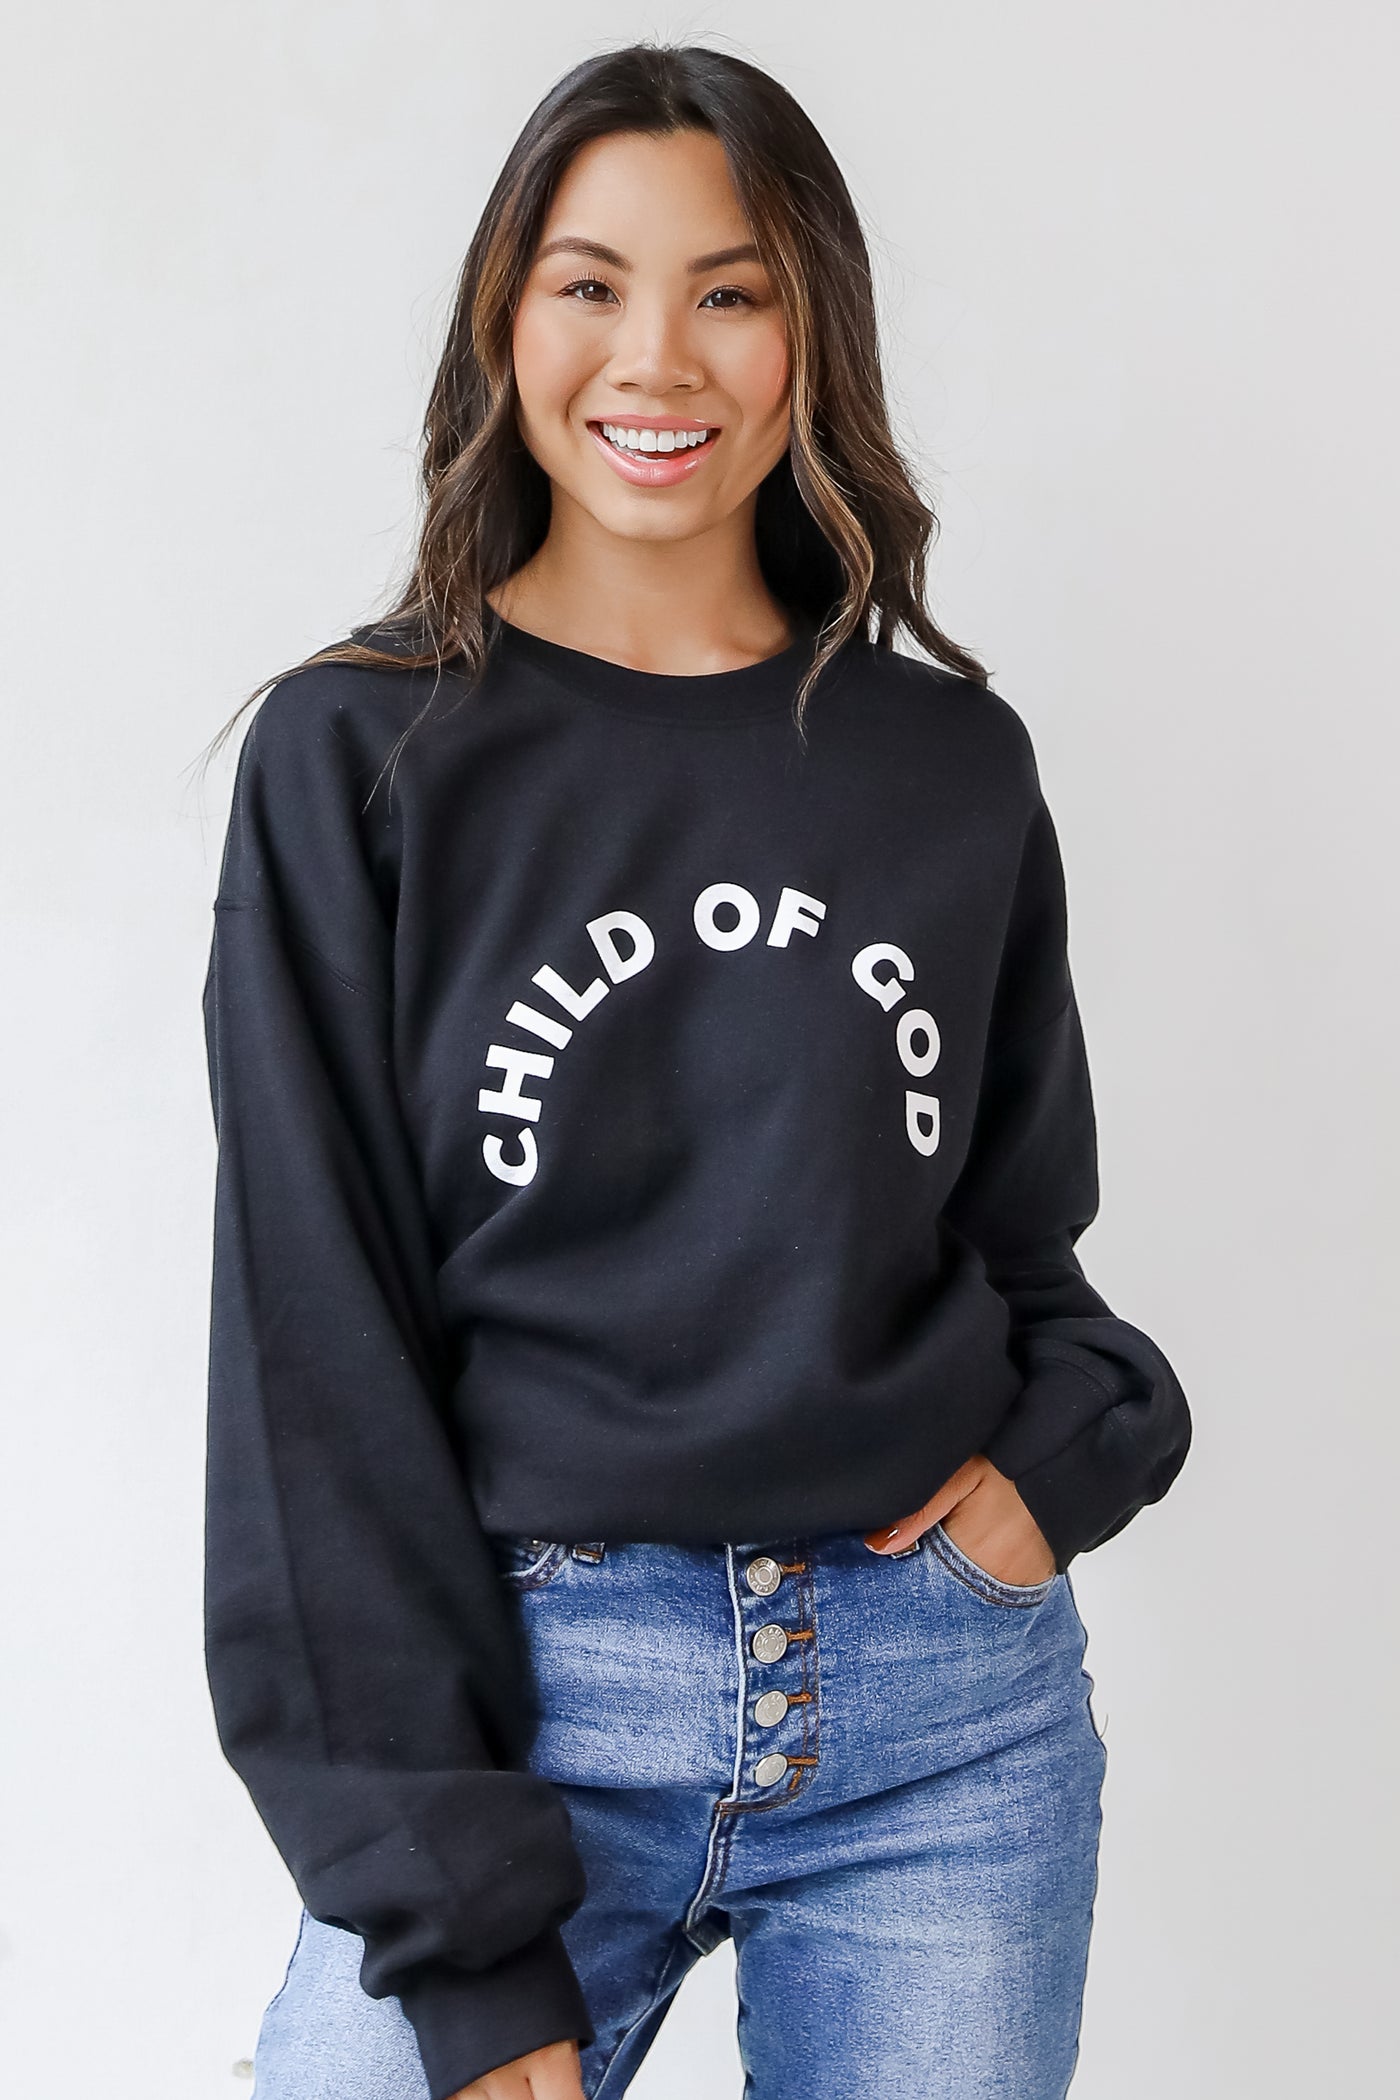 This comfy sweatshirt is designed with a soft and stretchy knit with a fleece interior. It features a crew neckline, long sleeves, a relaxed fit, and the words "Child Of God" on the front. 